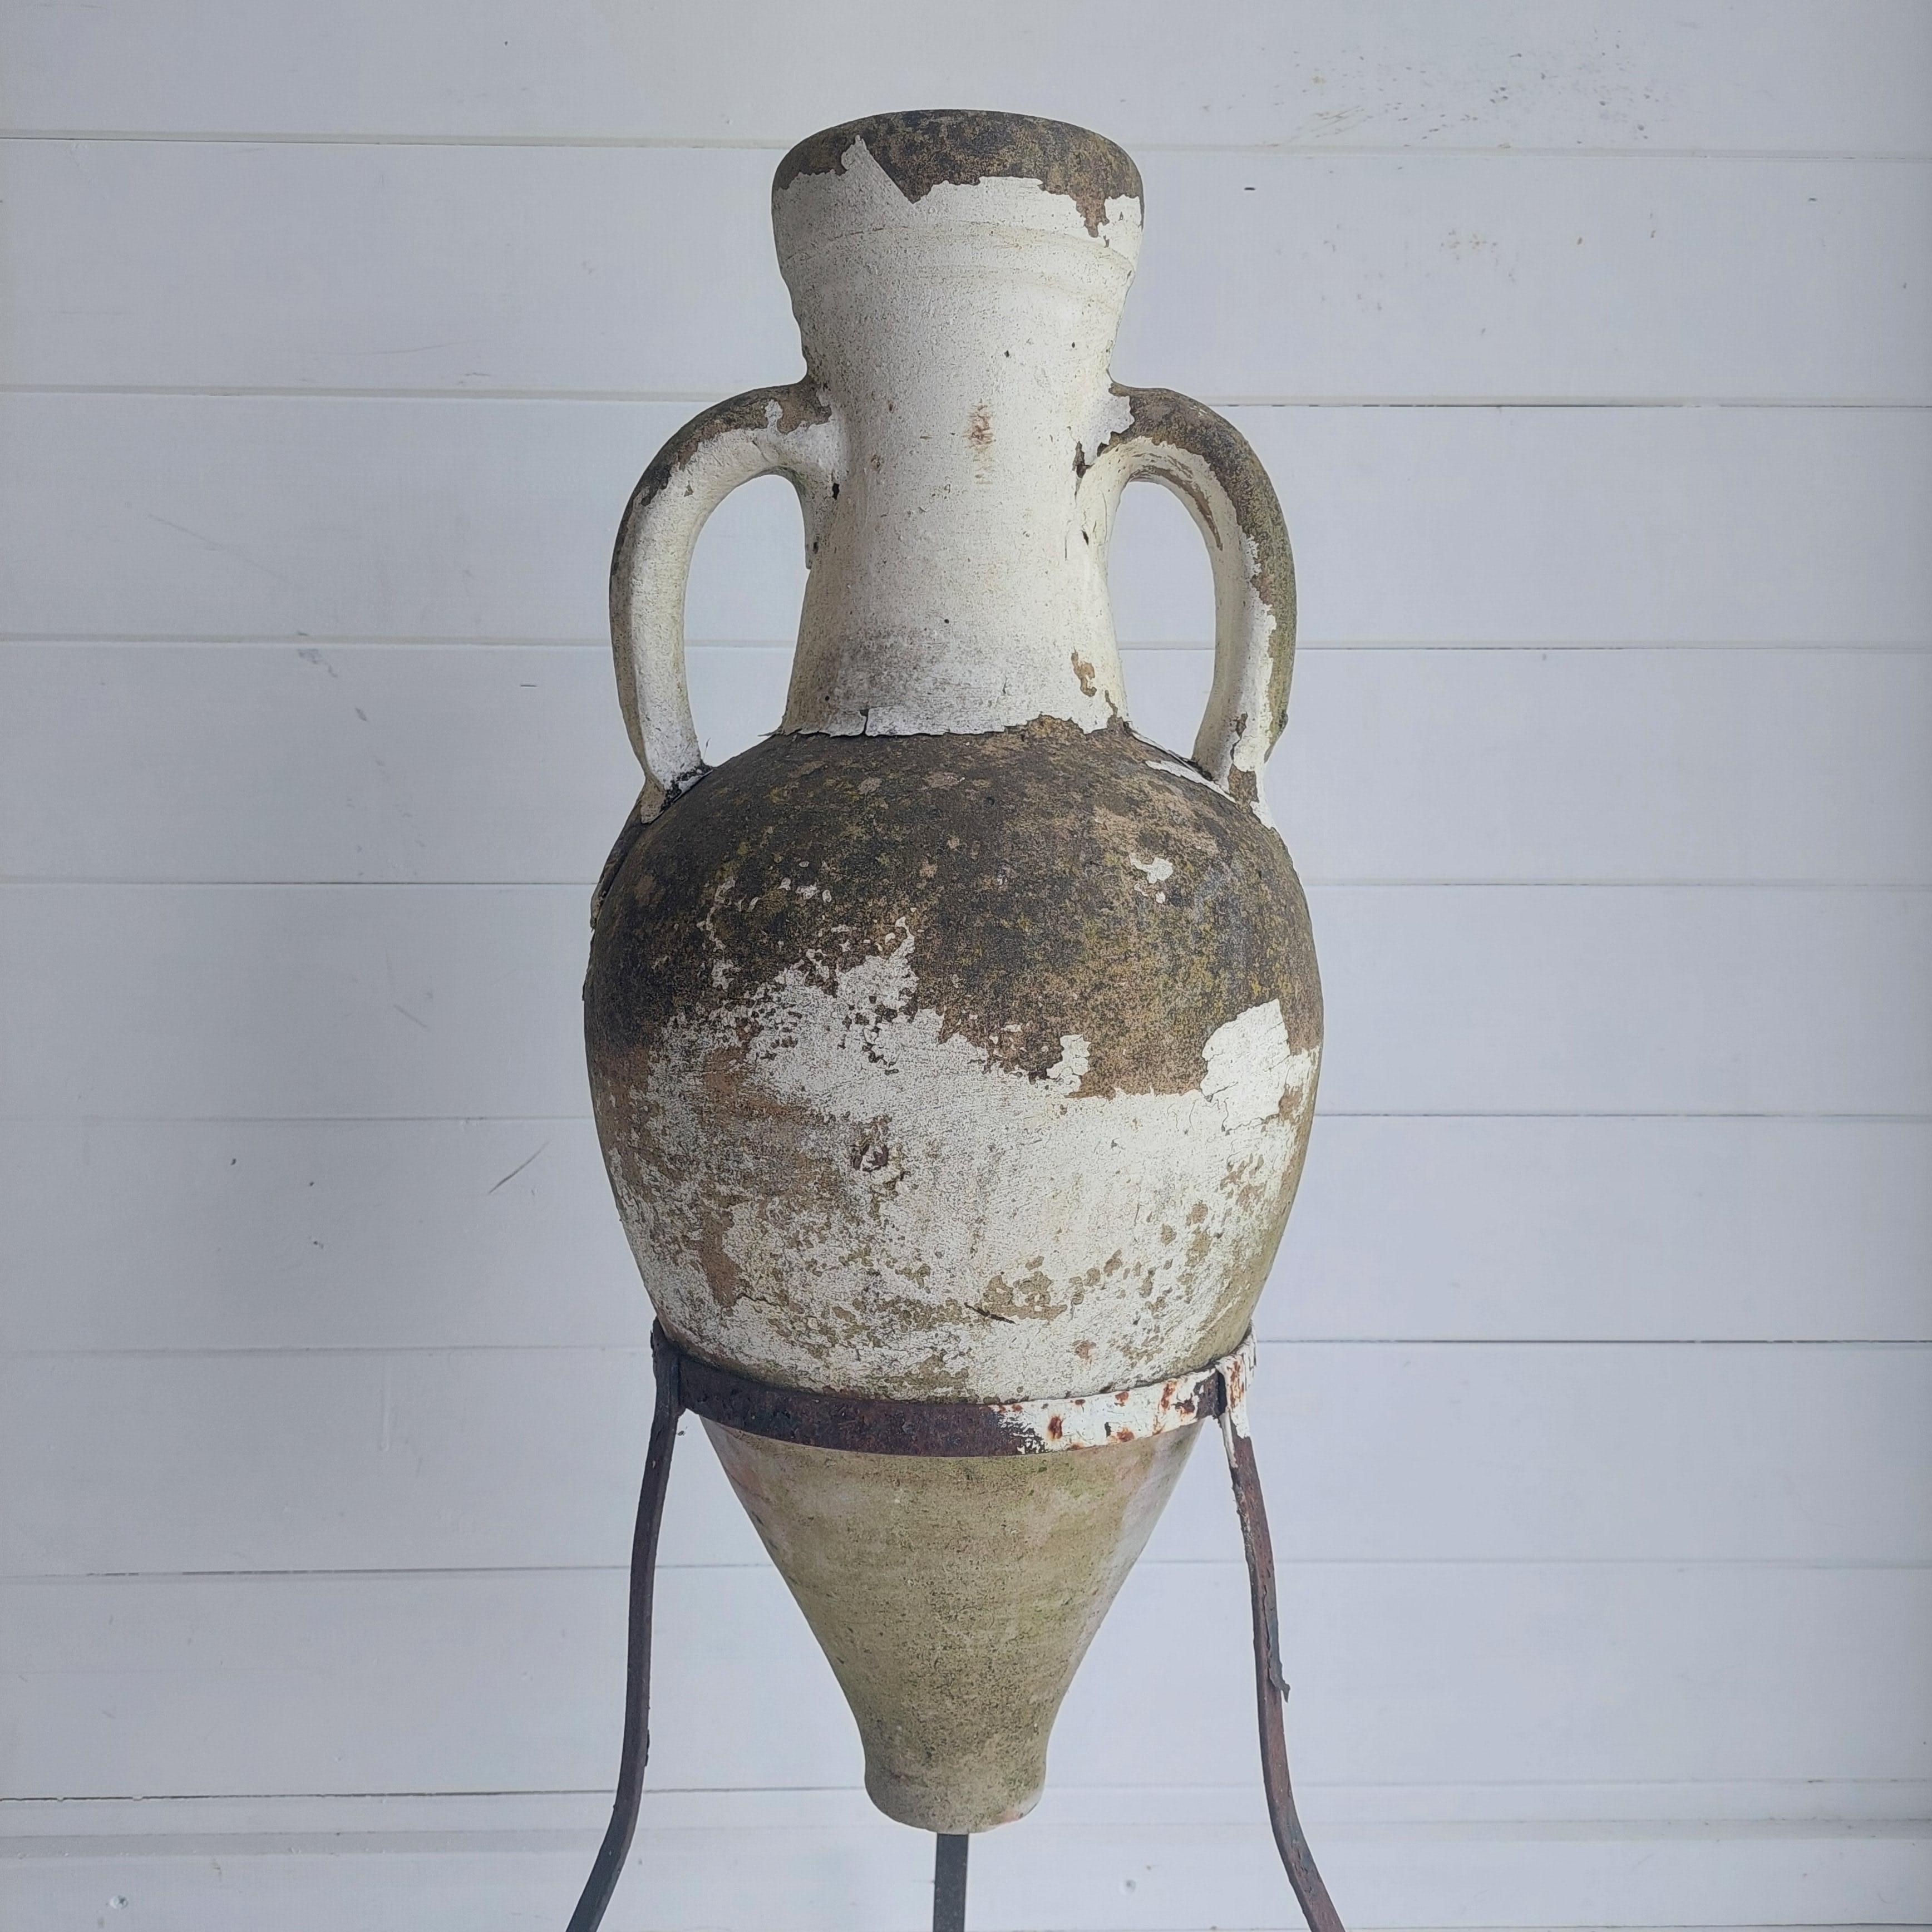 Unique shaped terracotta Greek amphora.
Fantastic 'elongated' form.
On iron tripod stand.
Beautiful decorative amphora that replicates the Ancient Greek amphora that was used as a storage and transportation jar.
Amphora with cylindrical neck